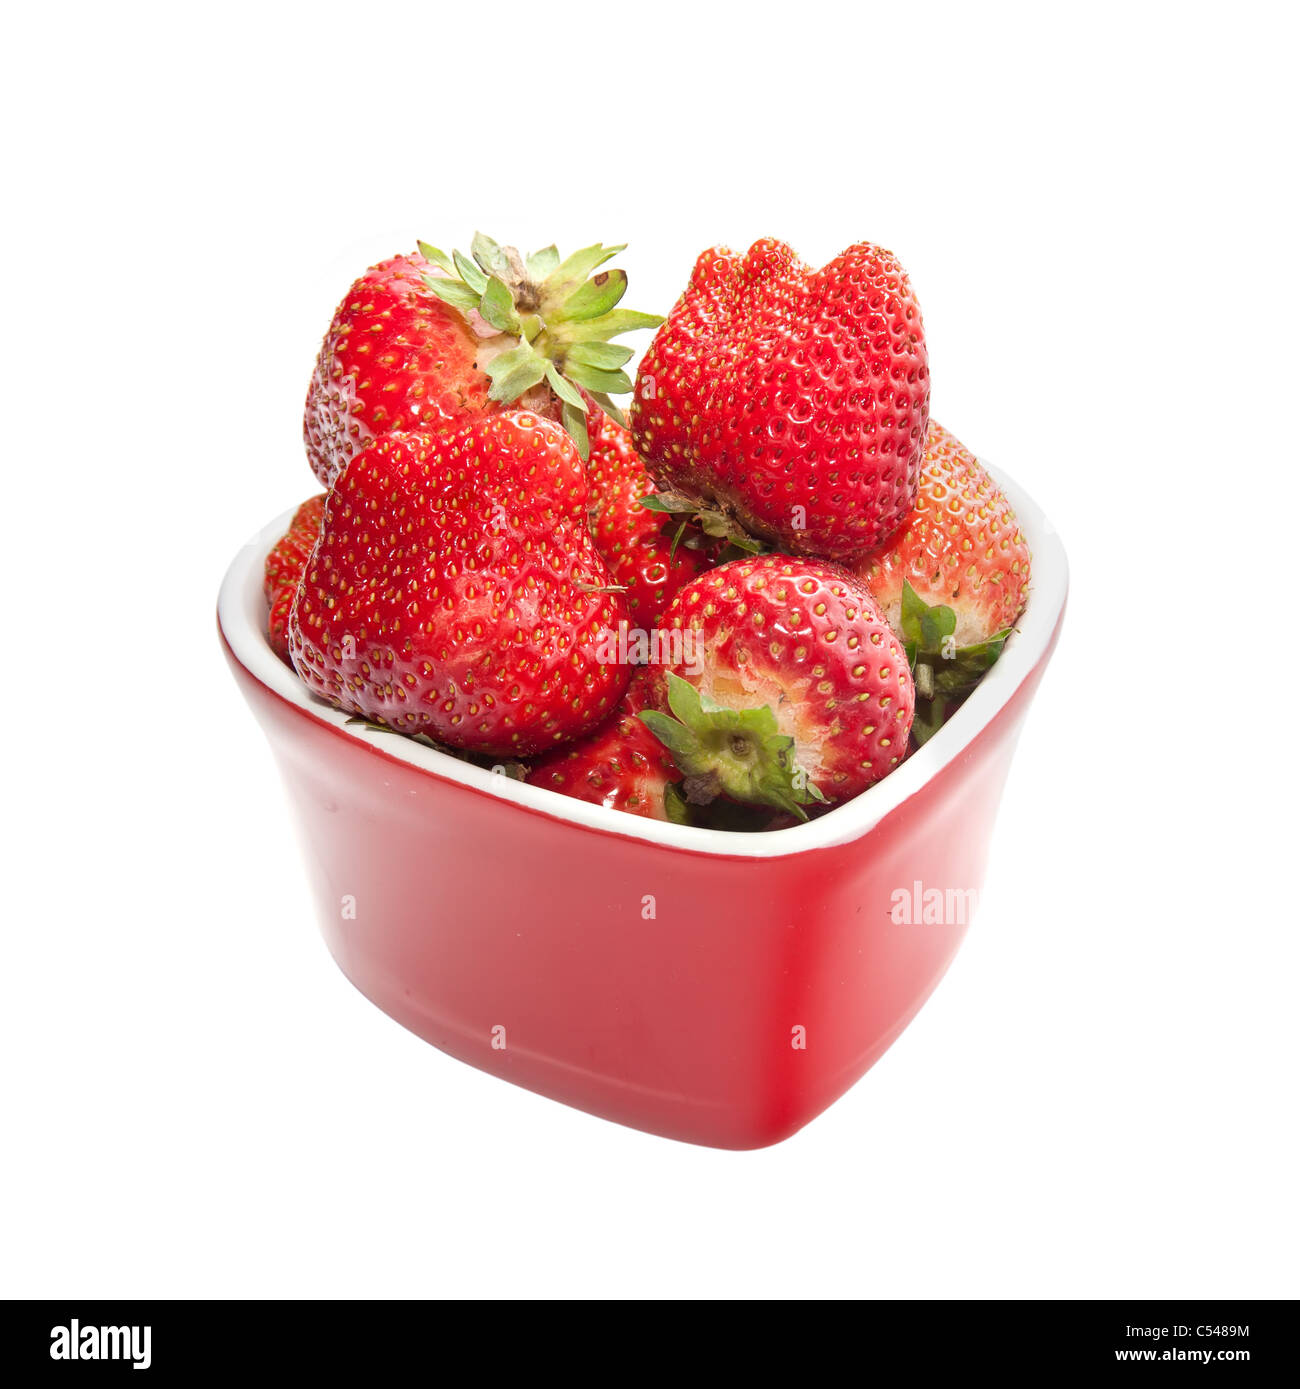 Strawberry, isolated on a white background. Stock Photo